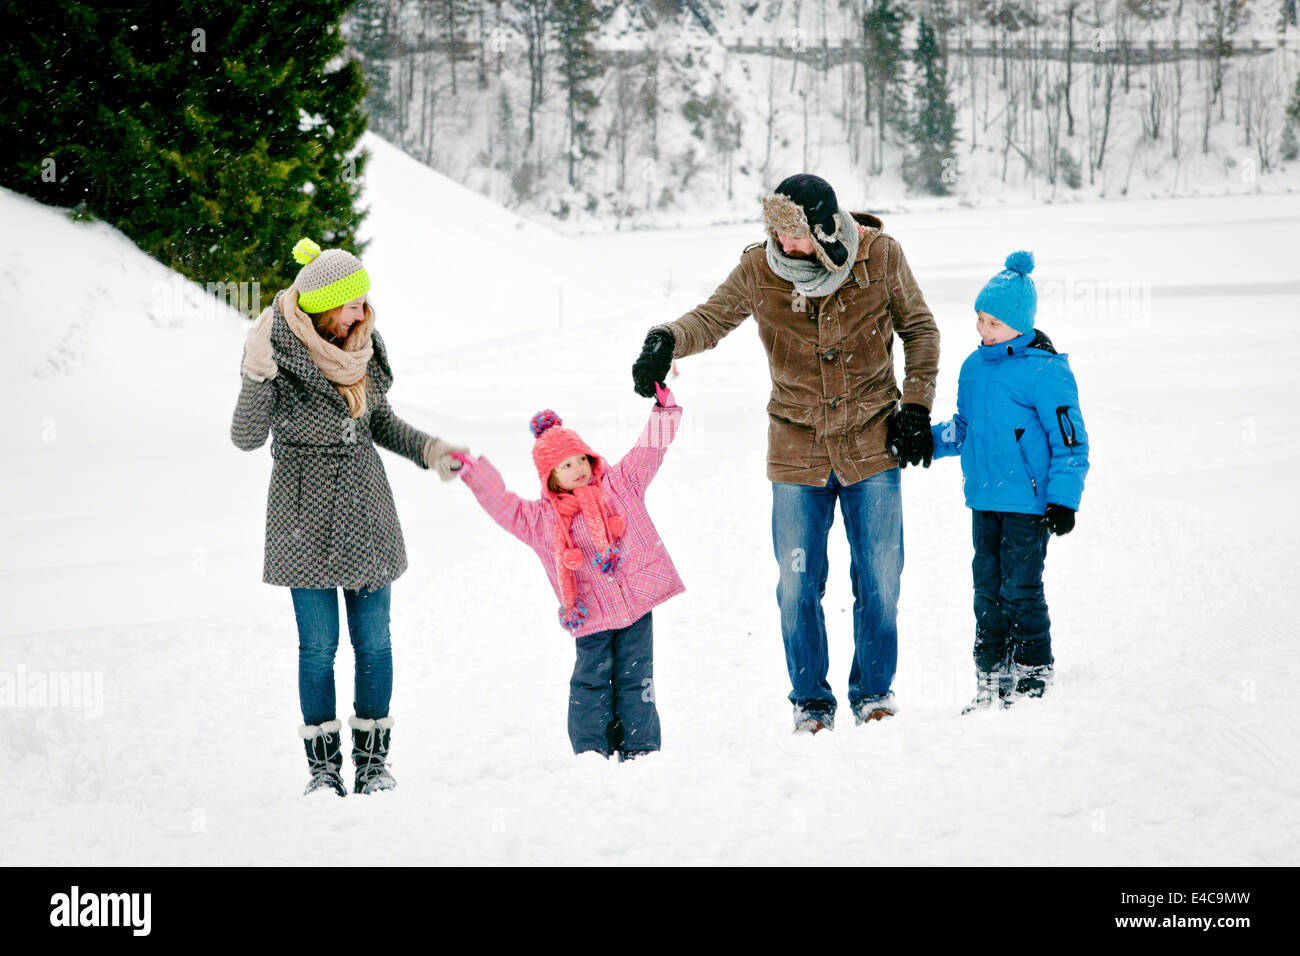 Family with two children in snow-covered landscape having fun, Bavaria, Germany Stock Photo